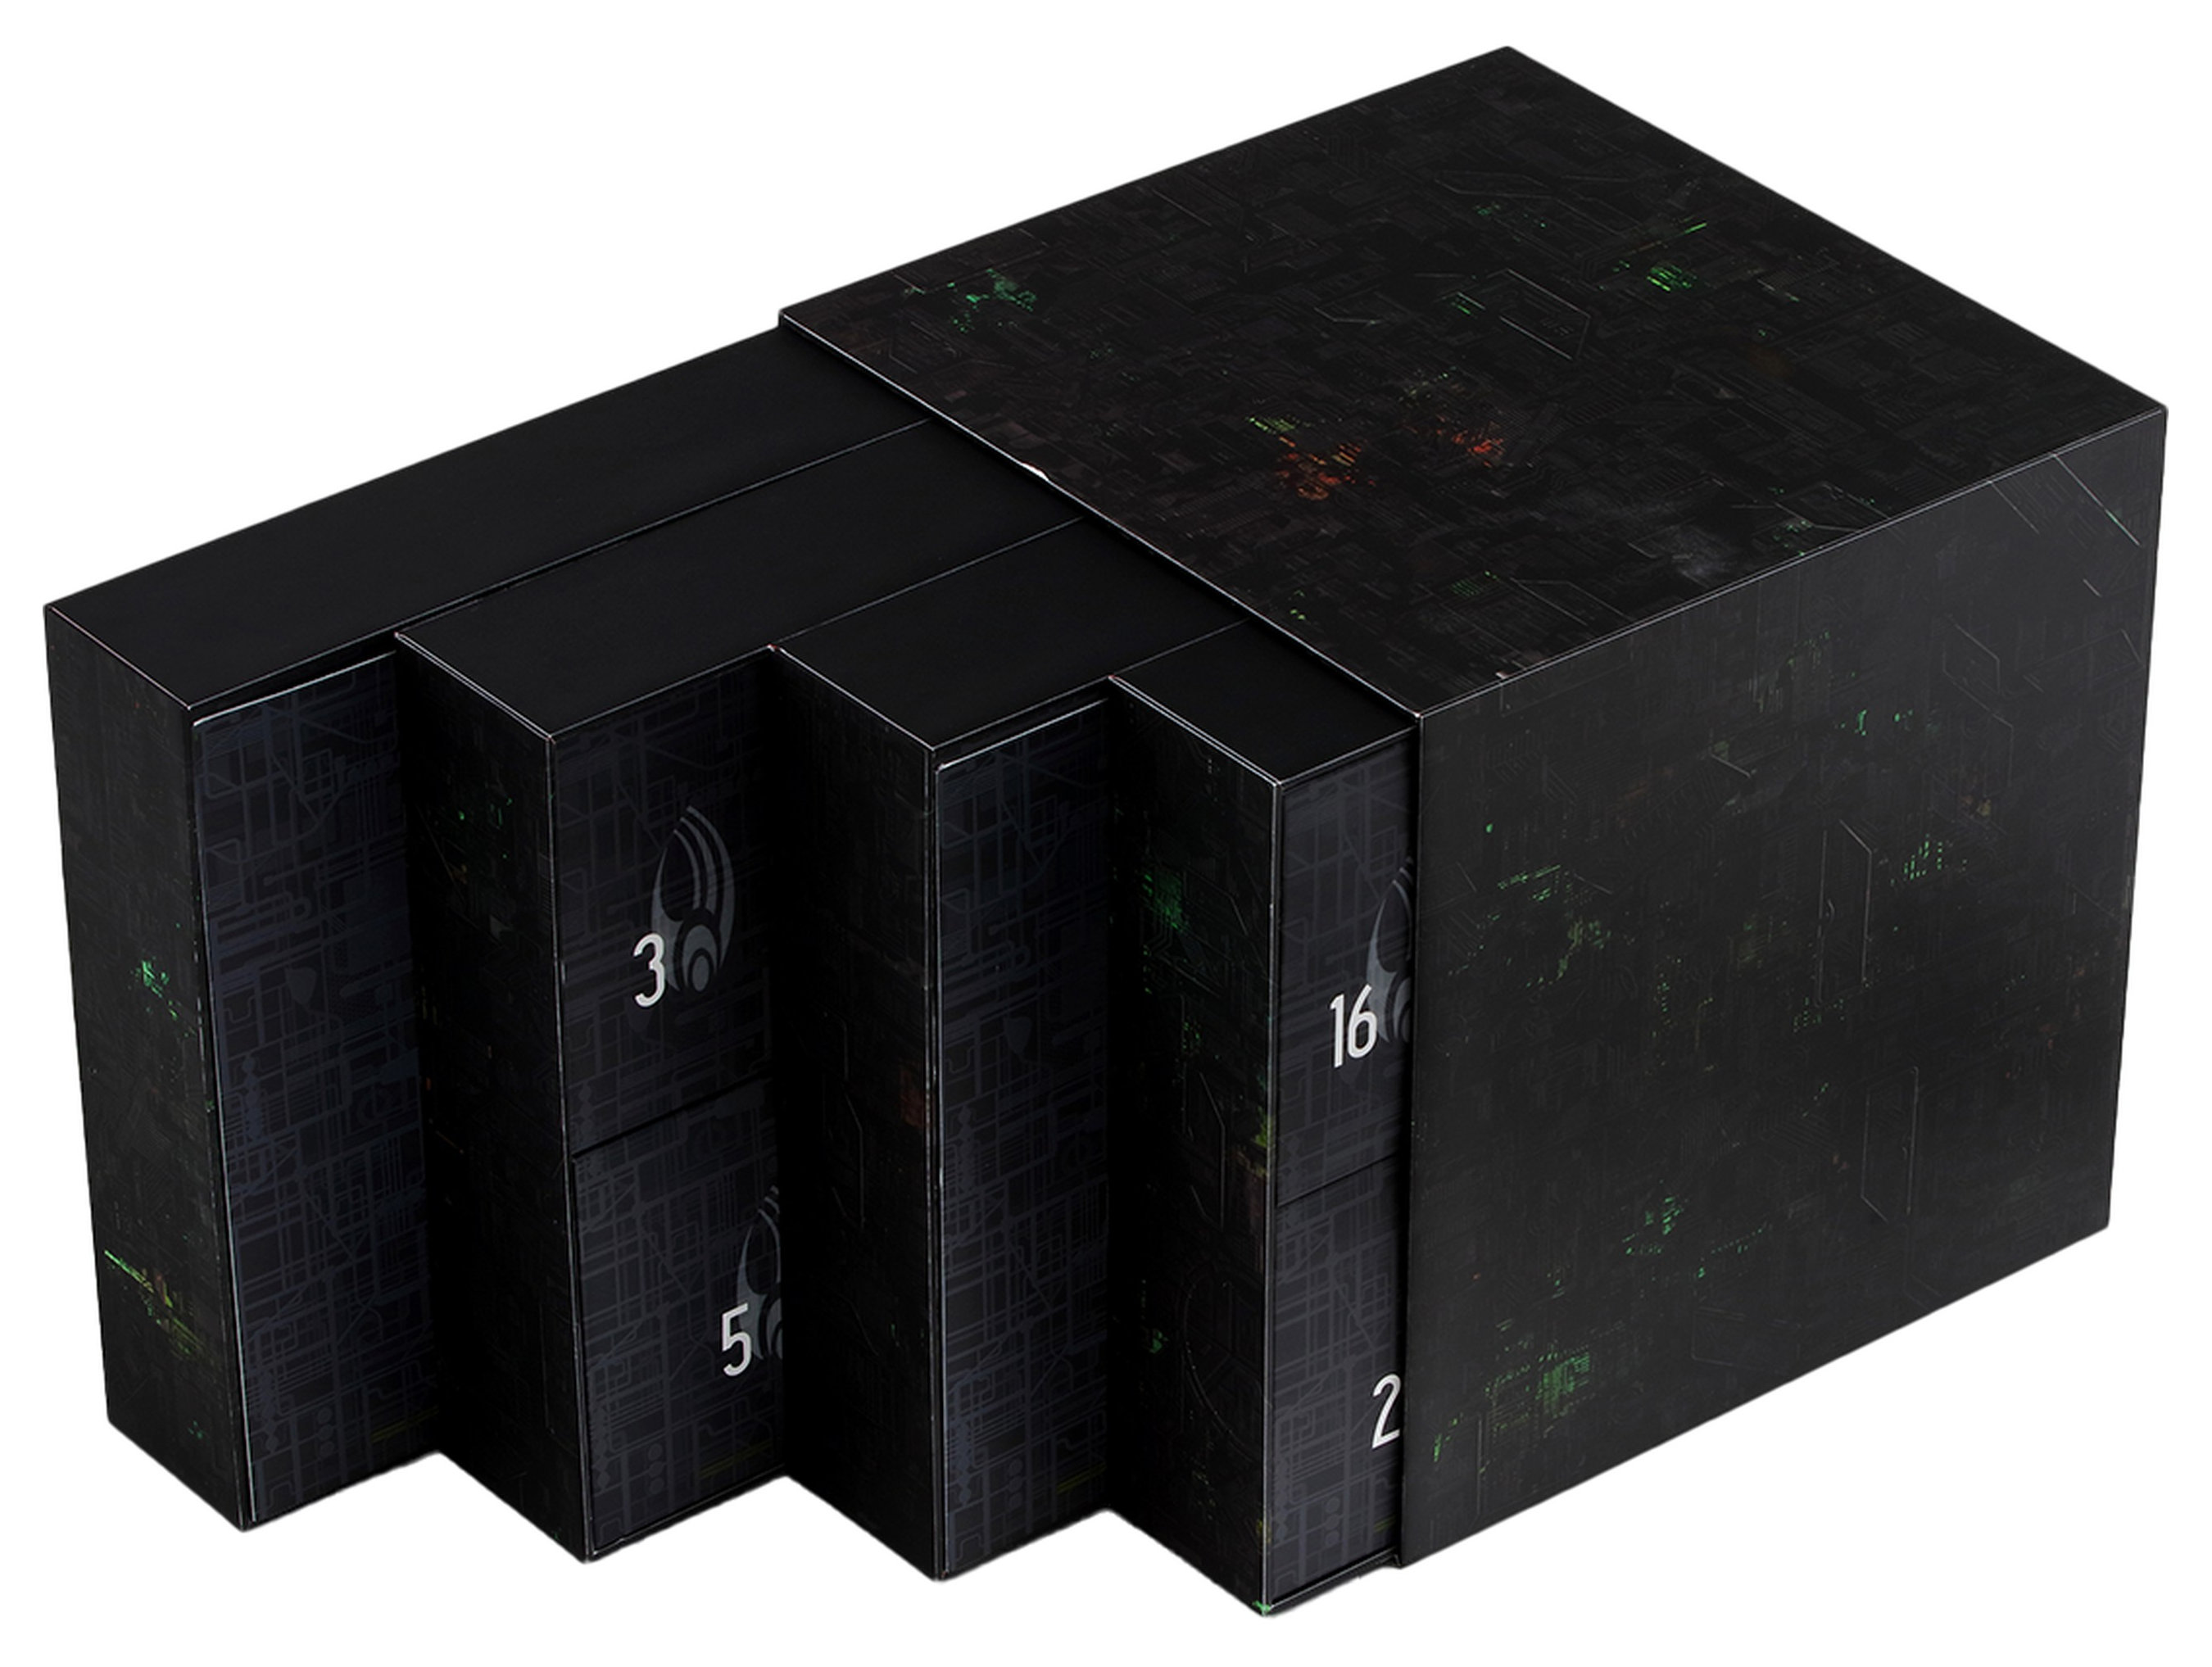 The Trek Collective Cube advent calendar previewed